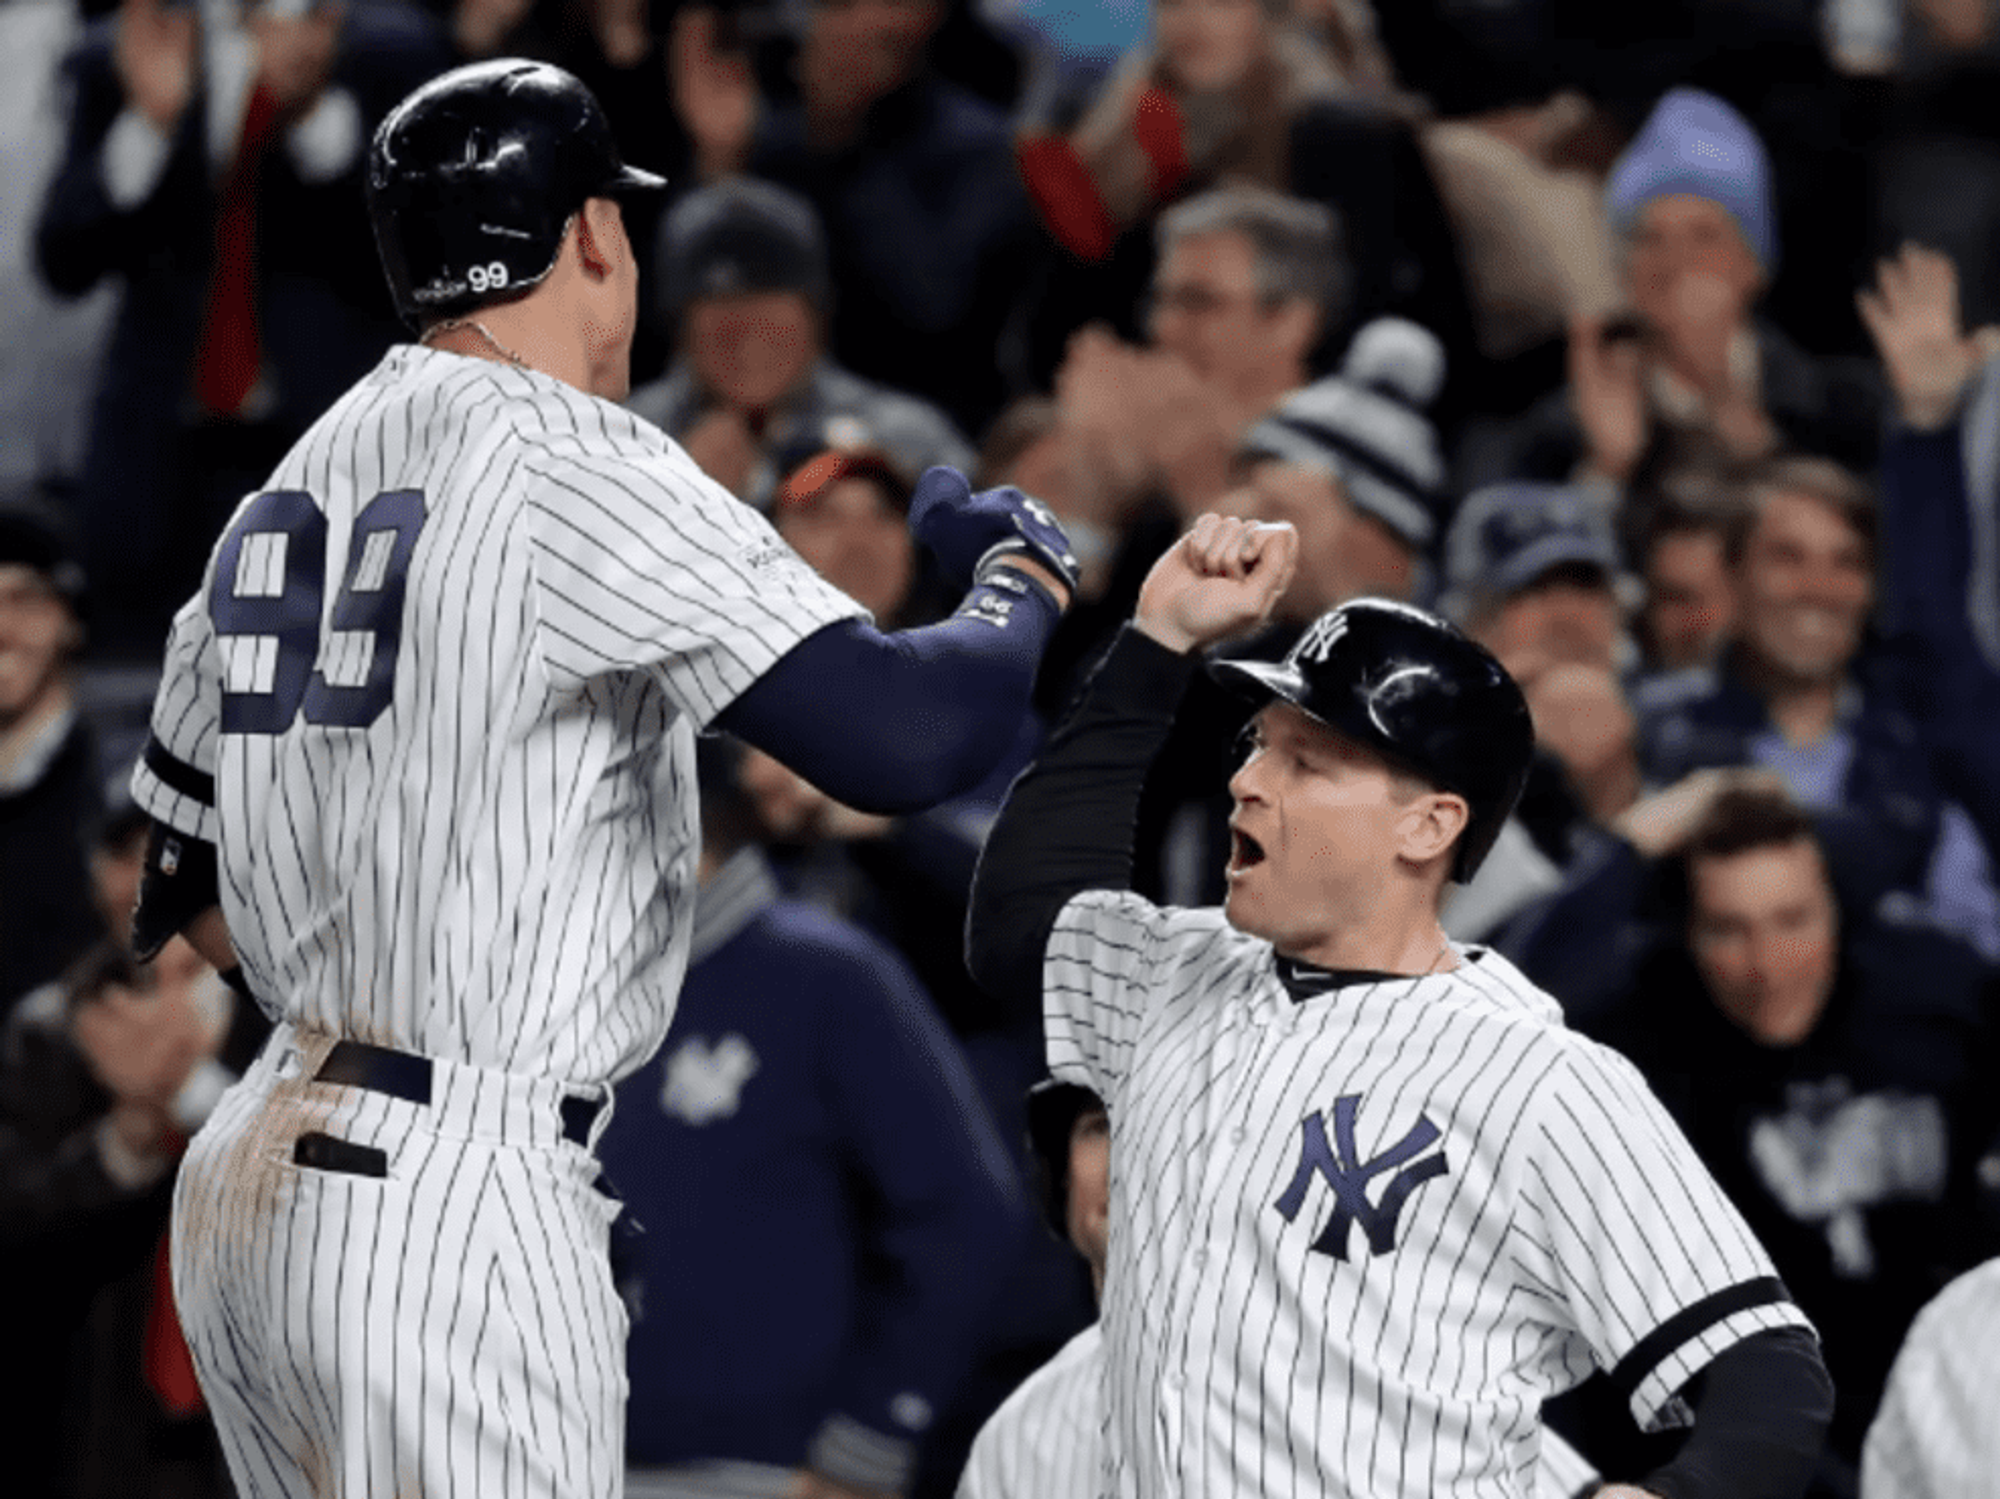 New York Yankees player Aaron Judge celebrates with Chase Headley after his three-run homer in win over Astros